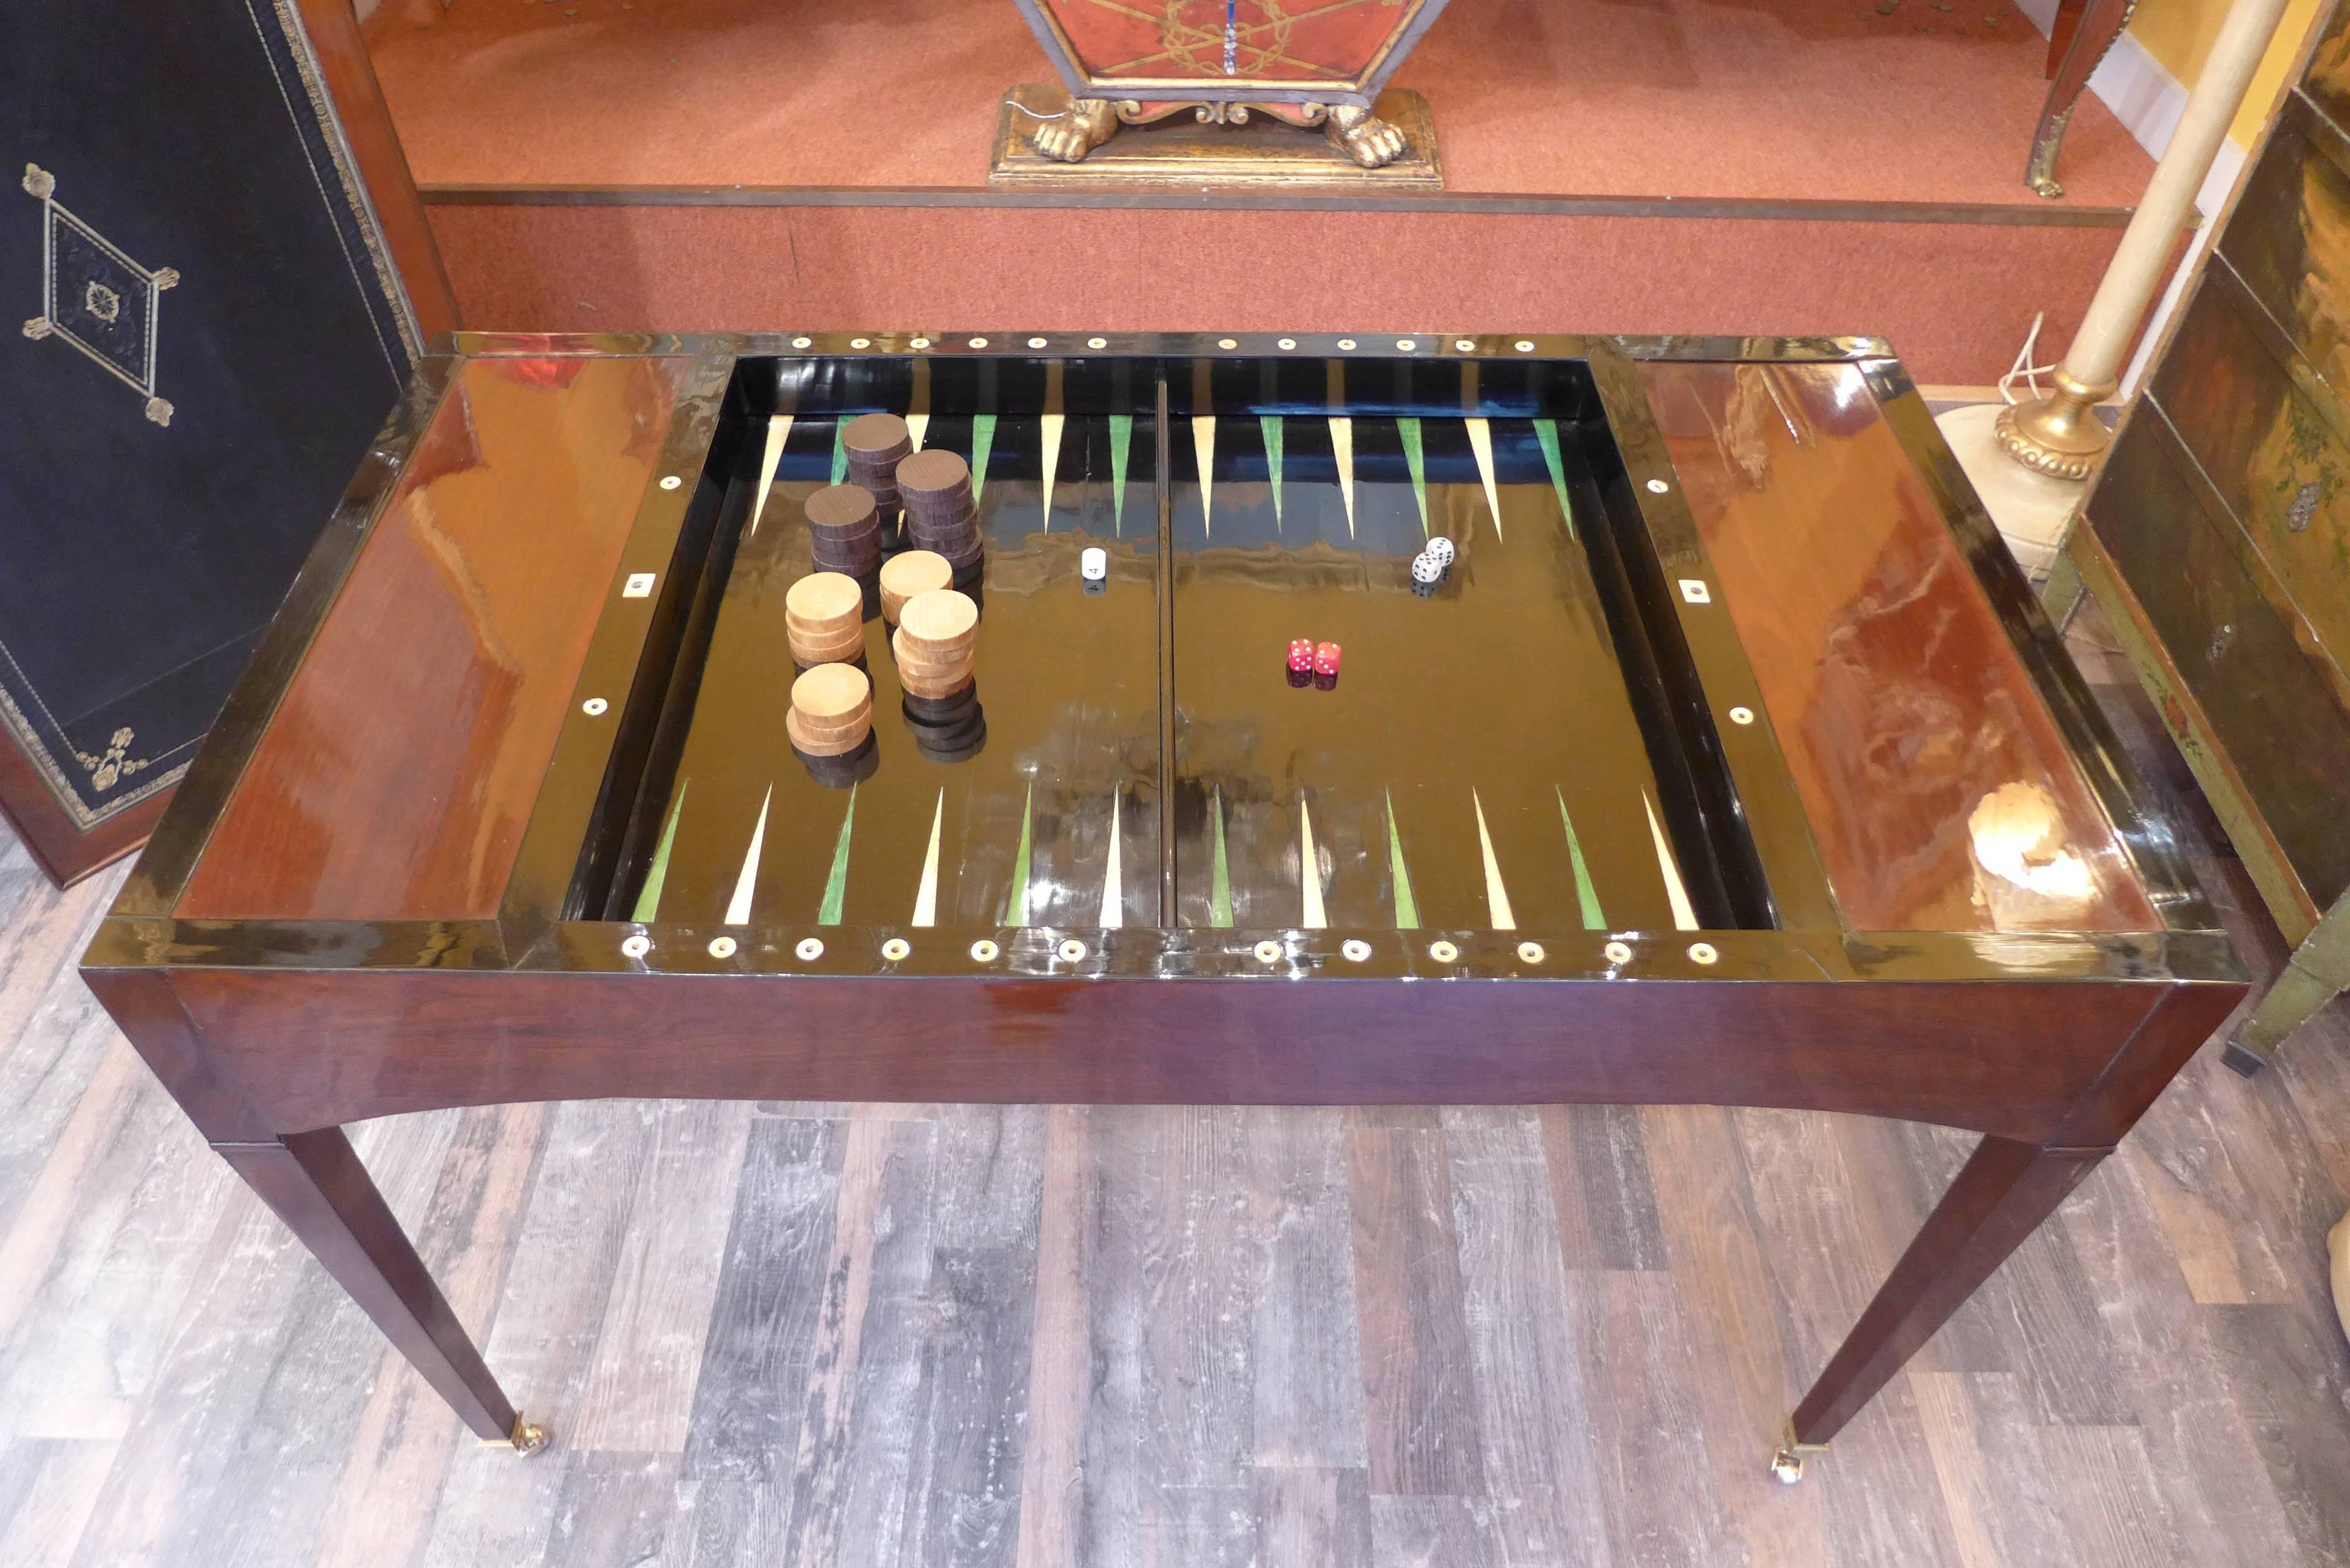 French Directoire period Tric-Trac or “Jeu de Jacquet “ game table in mahogany and mahogany veneer. Very practical removal and reversible top with handsome decorated new leather. One side serves as a small desk and the reverse side of the tabletop